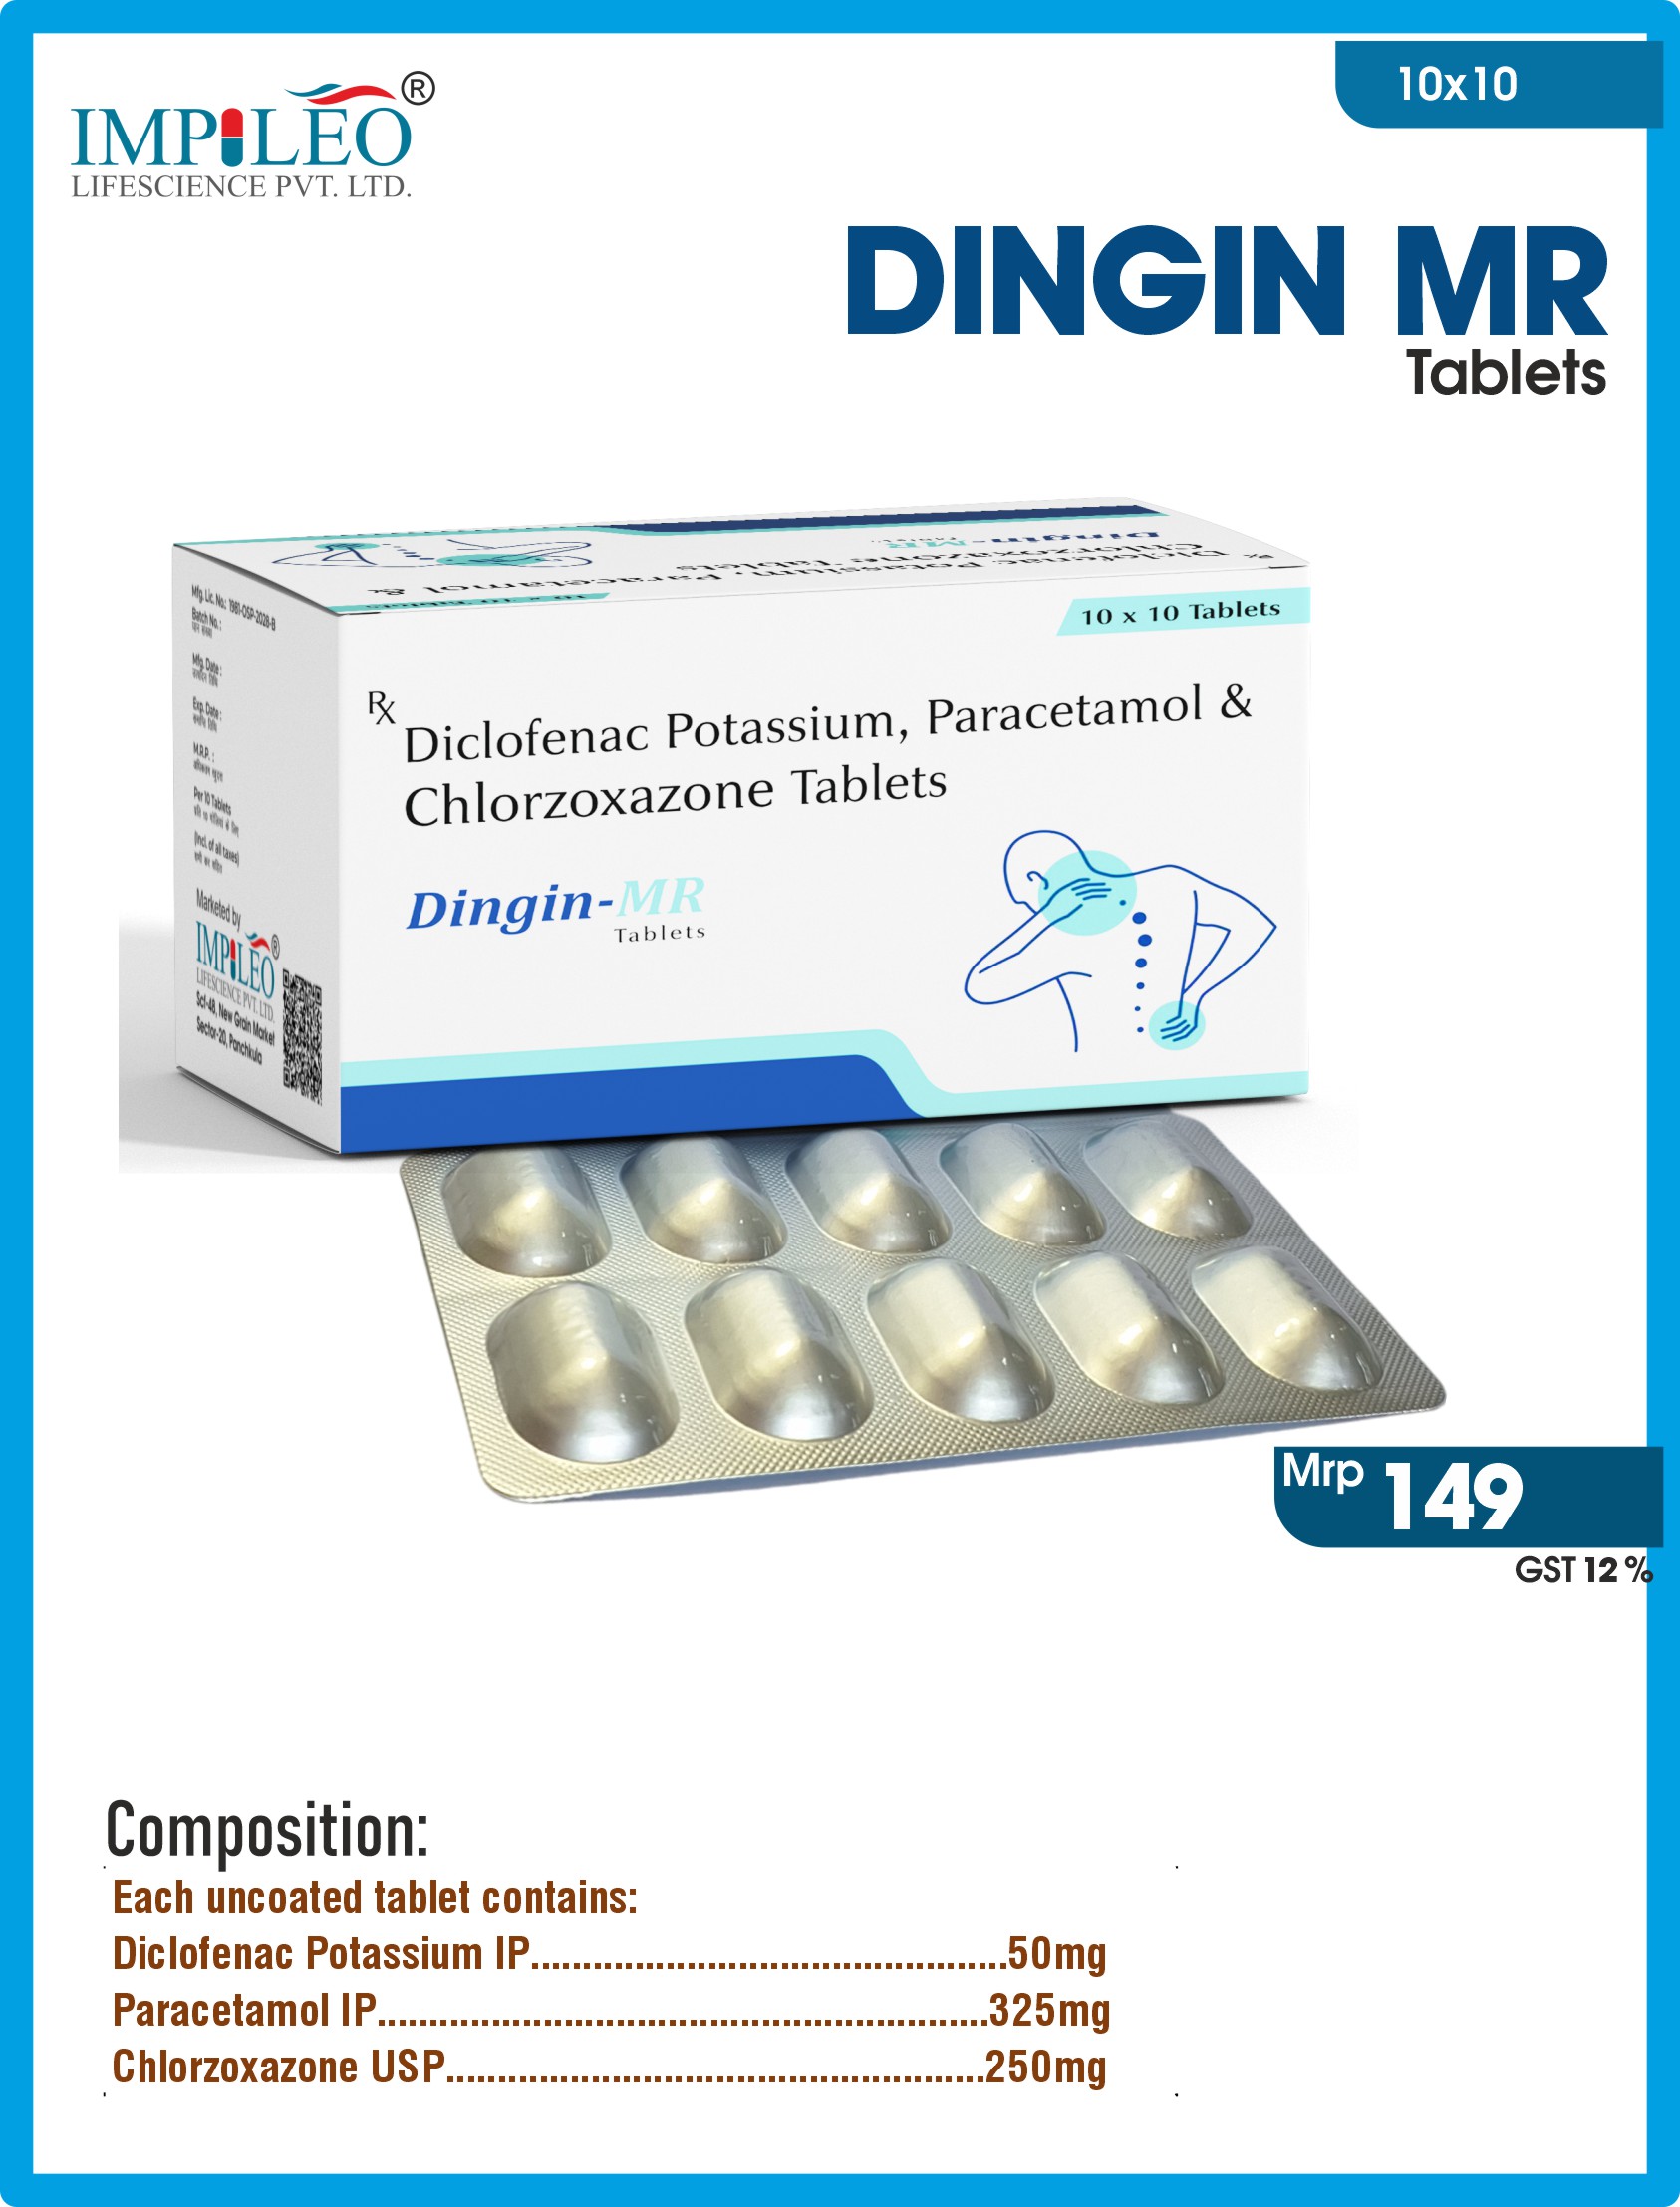 Discover High-Quality DINGIN MR Tablets from Top PCD Pharma Franchise in Chandigarh